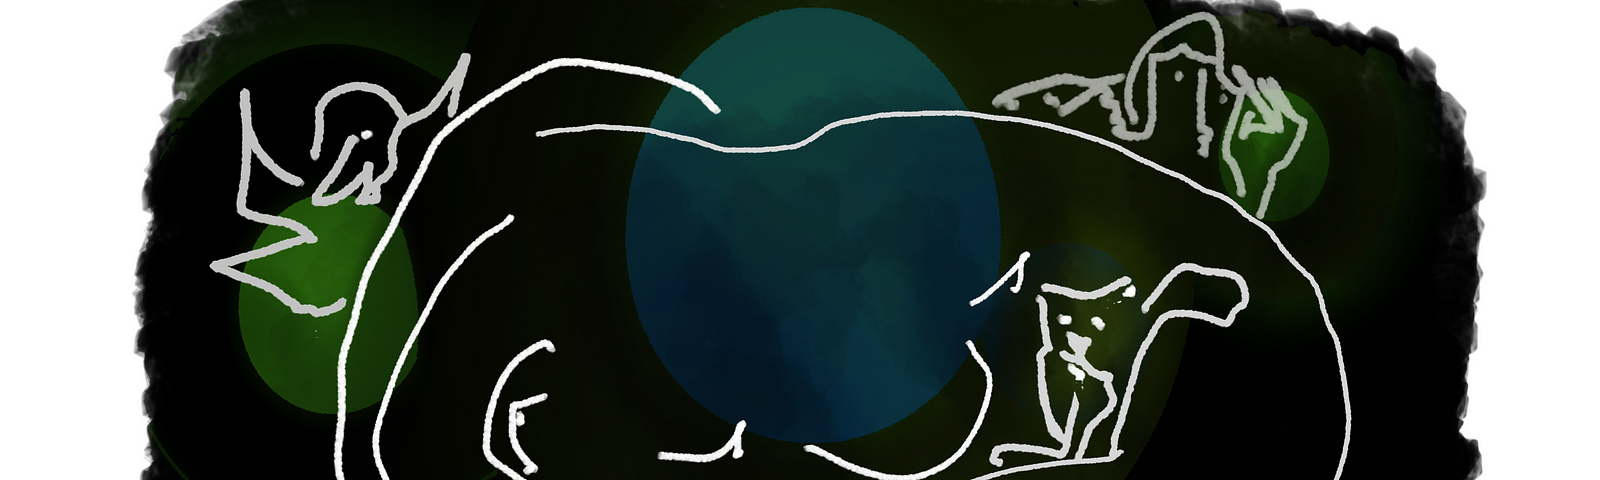 A cartoonish drawing made with abstract and minimal hand-drawn white lines on a black background. A central figure cradles a cat from a crouched position on the ground. To the left is a bird, behind the main figure is an abstract woman. There are soft greens and blues in egg shaped areas overlaid on the background, and a reddish hue to the ground beneath the figure’s hands. Art by Doodleslice 2024